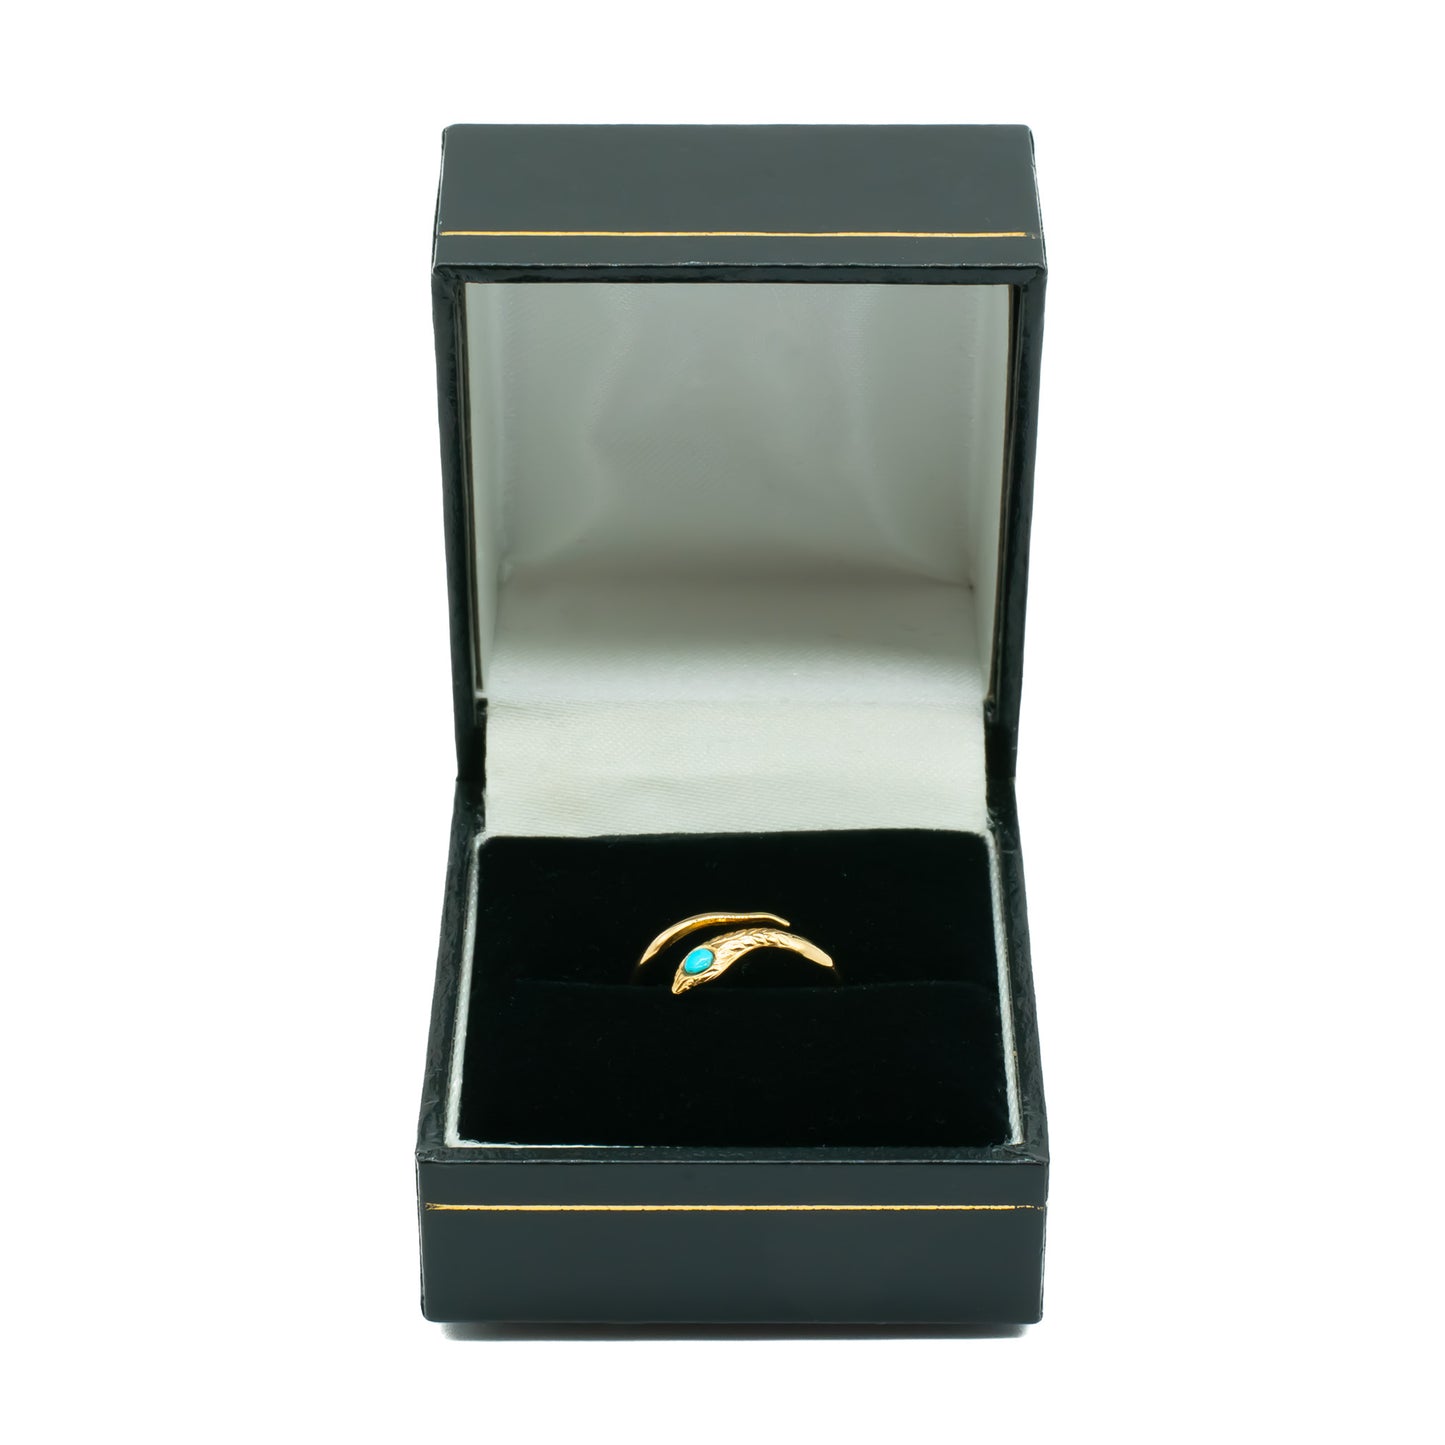 Delicate vintage 18ct gold snake ring with an engraved head, set with a cabochon turquoise stone. Italy.